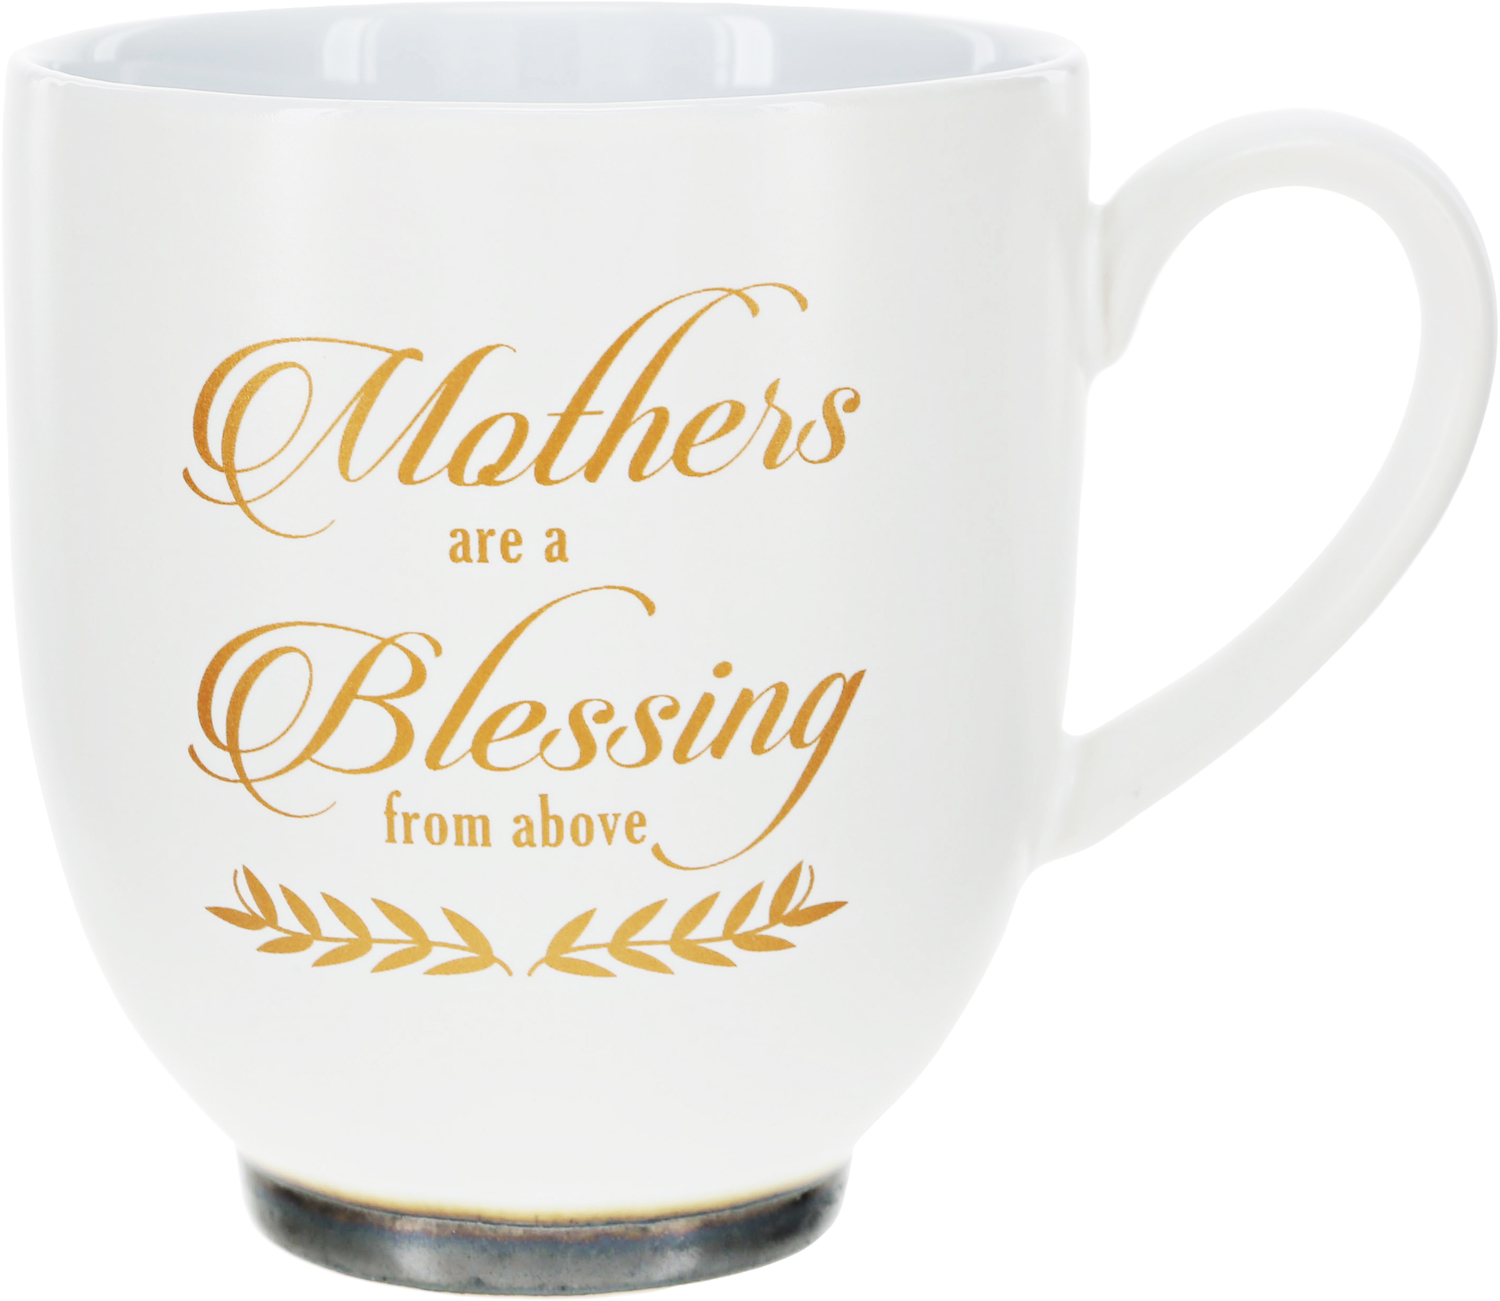 Mothers by Blessed by You - Mothers - 15.5 oz Cup